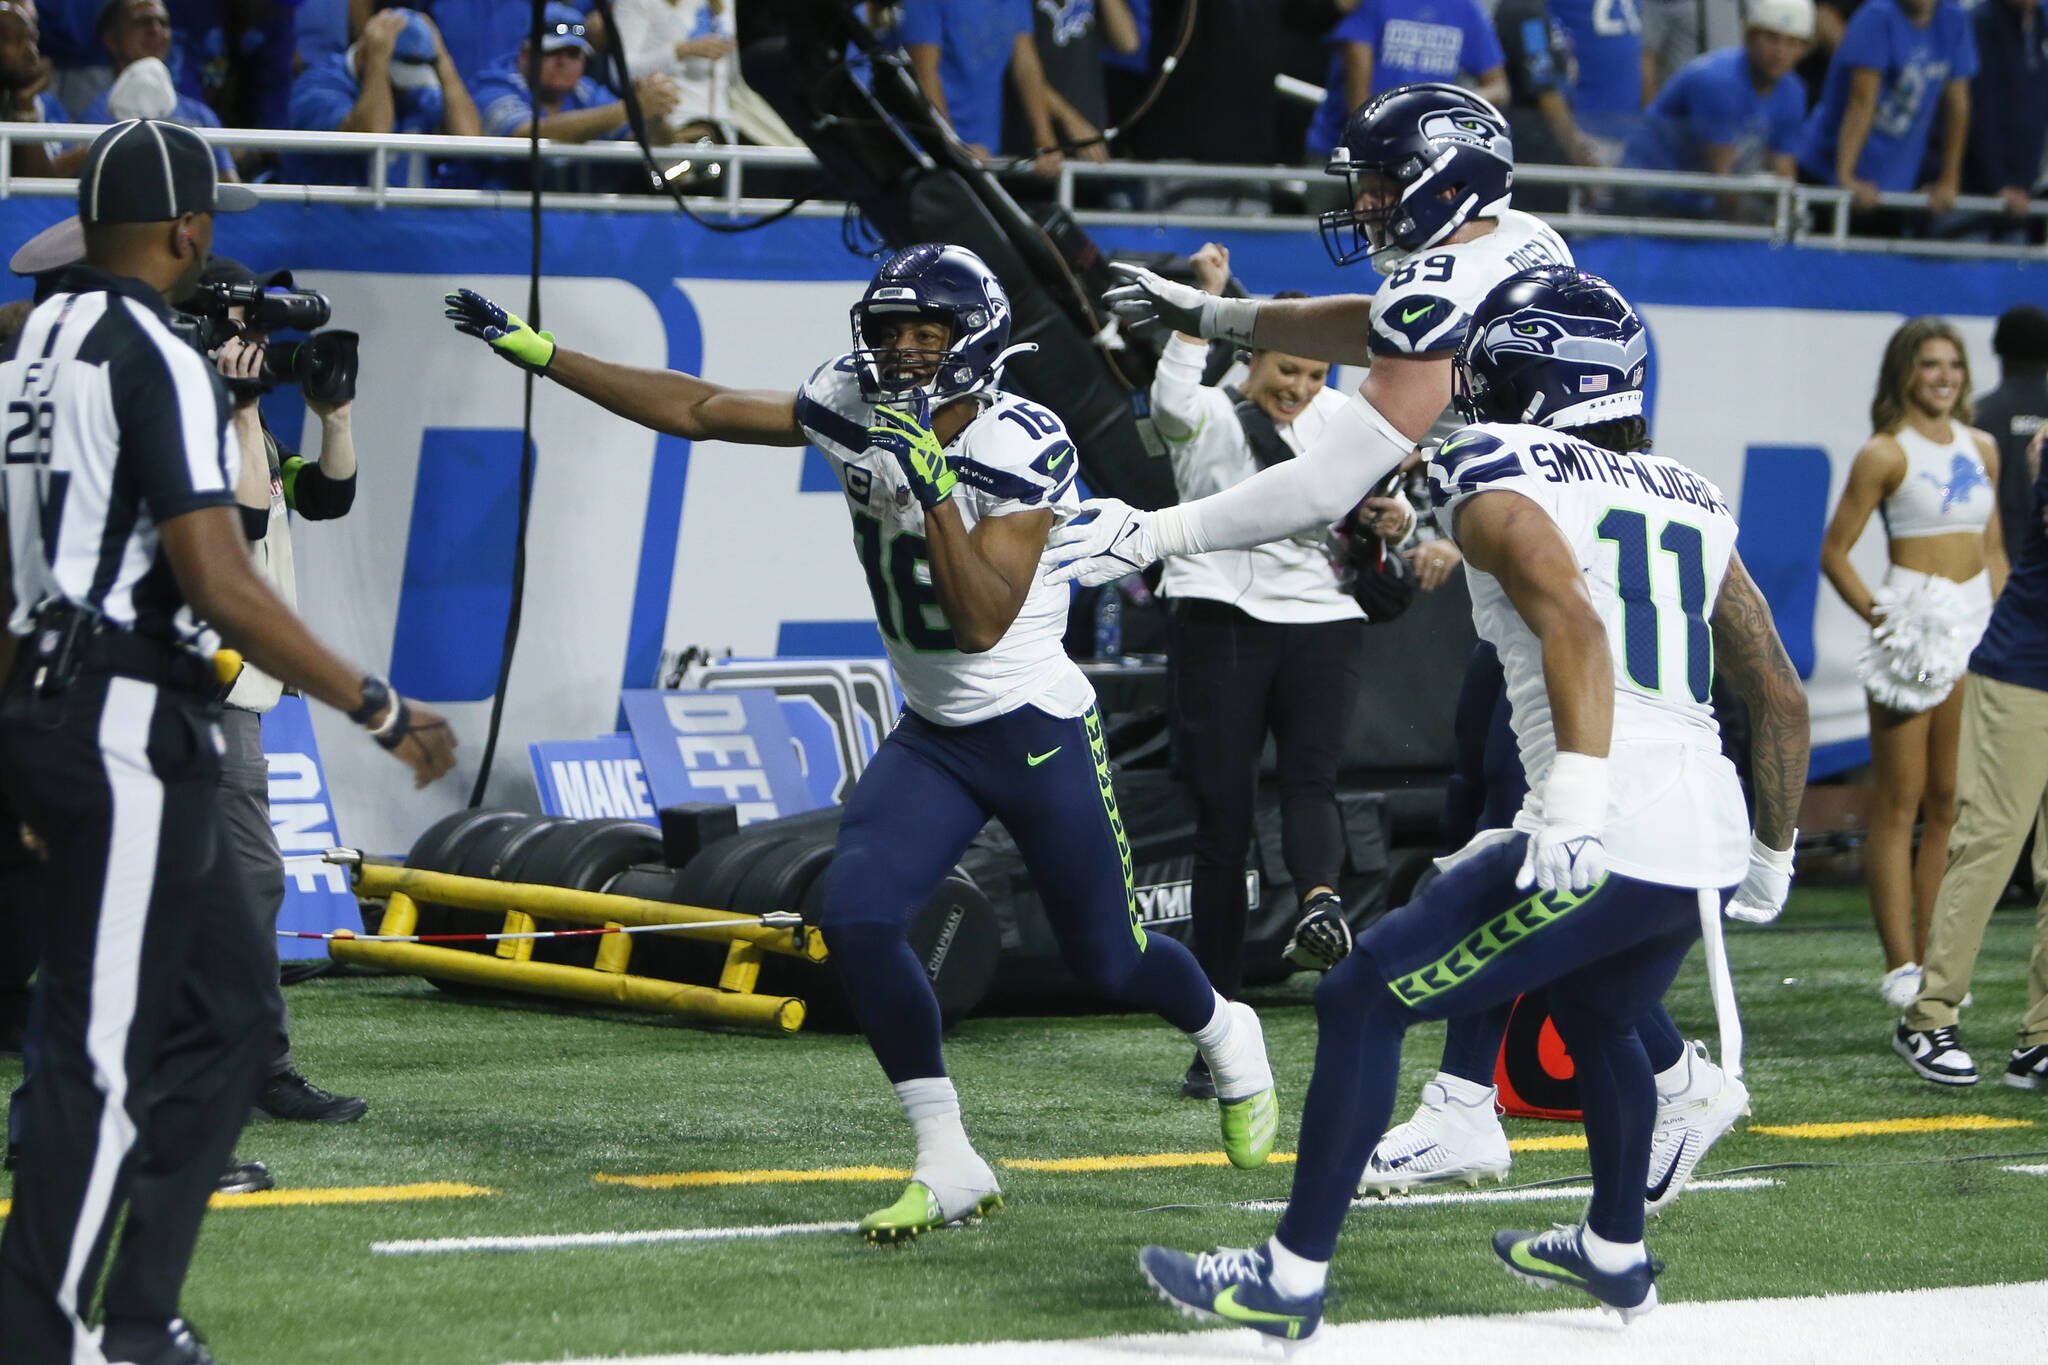 Grading the Seahawks in their 37-31 victory over the Lions